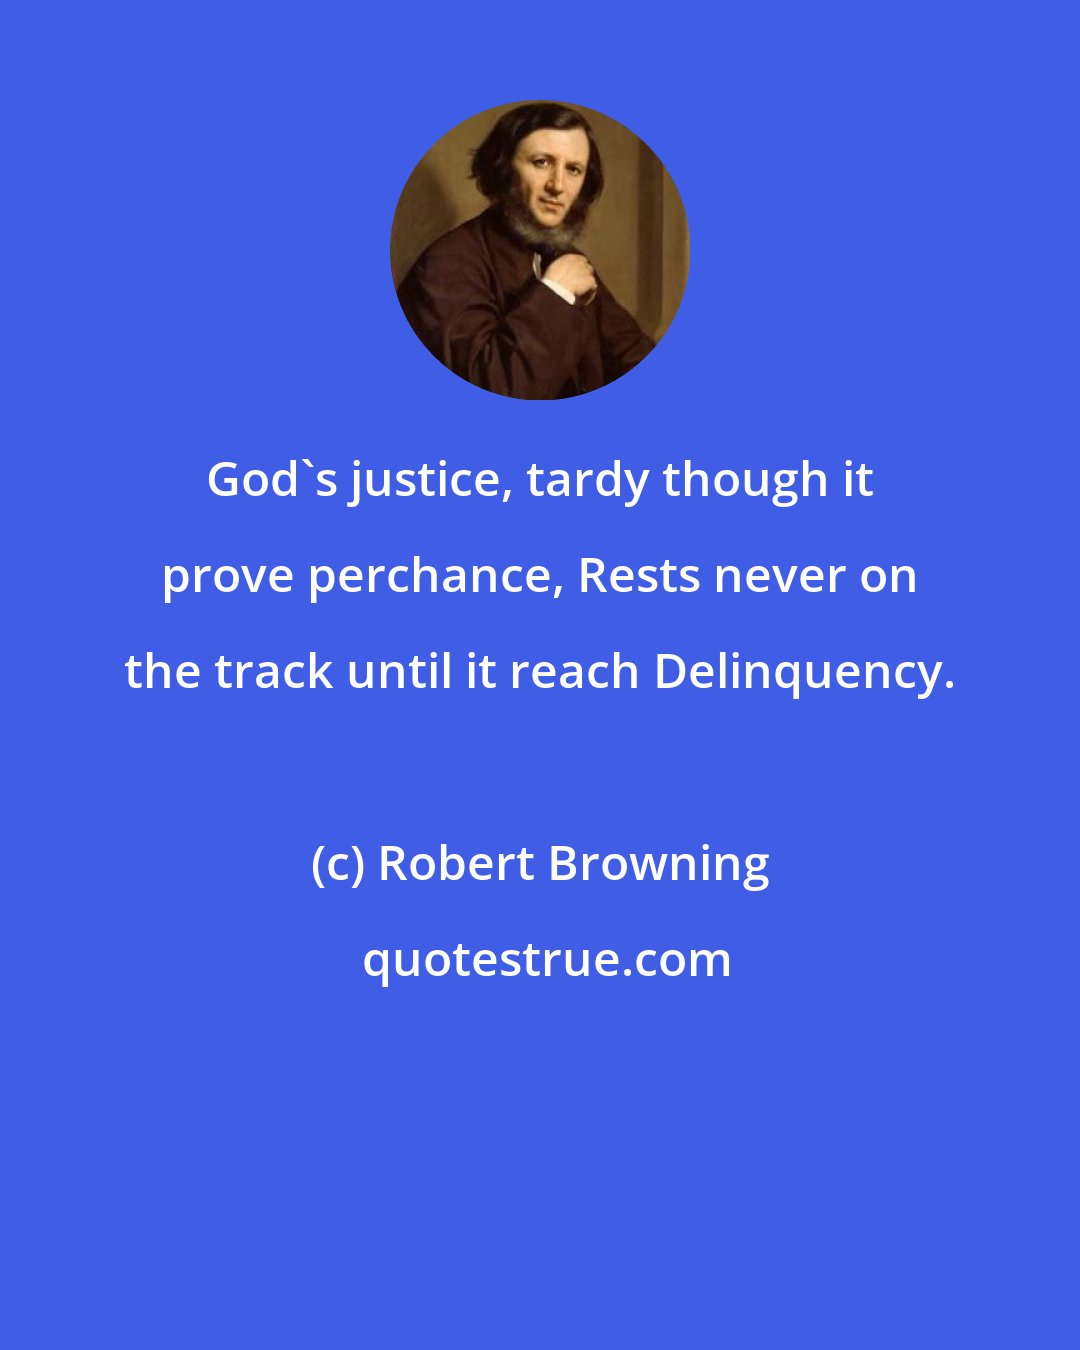 Robert Browning: God's justice, tardy though it prove perchance, Rests never on the track until it reach Delinquency.